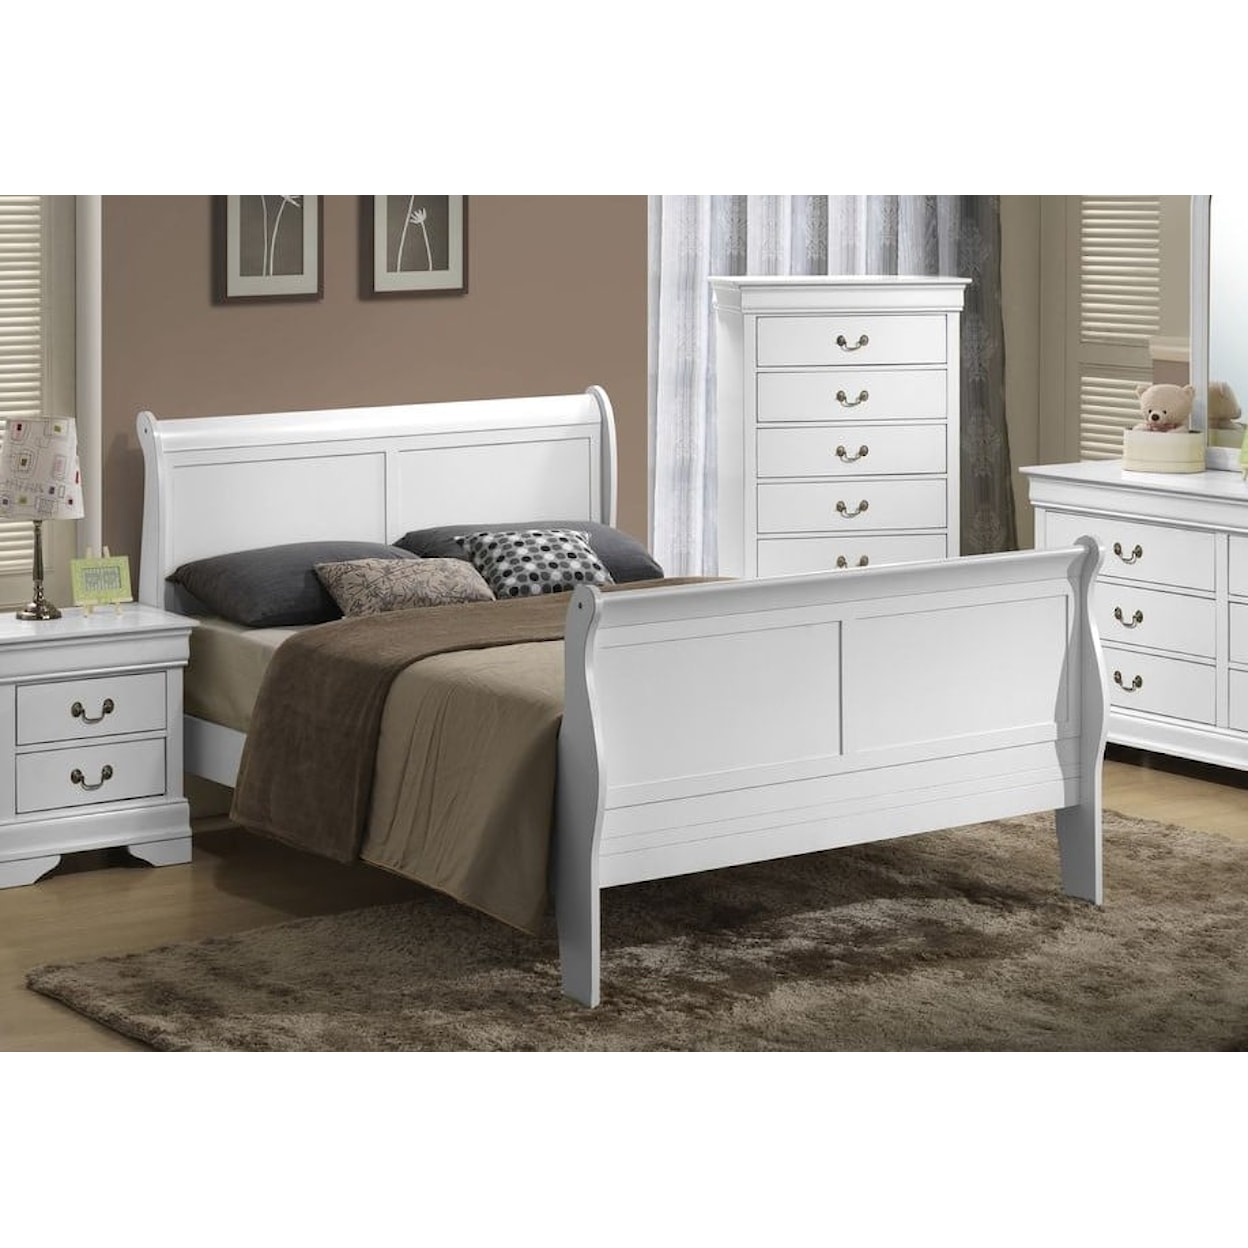 Lifestyle C4936A Full Sleigh Bed